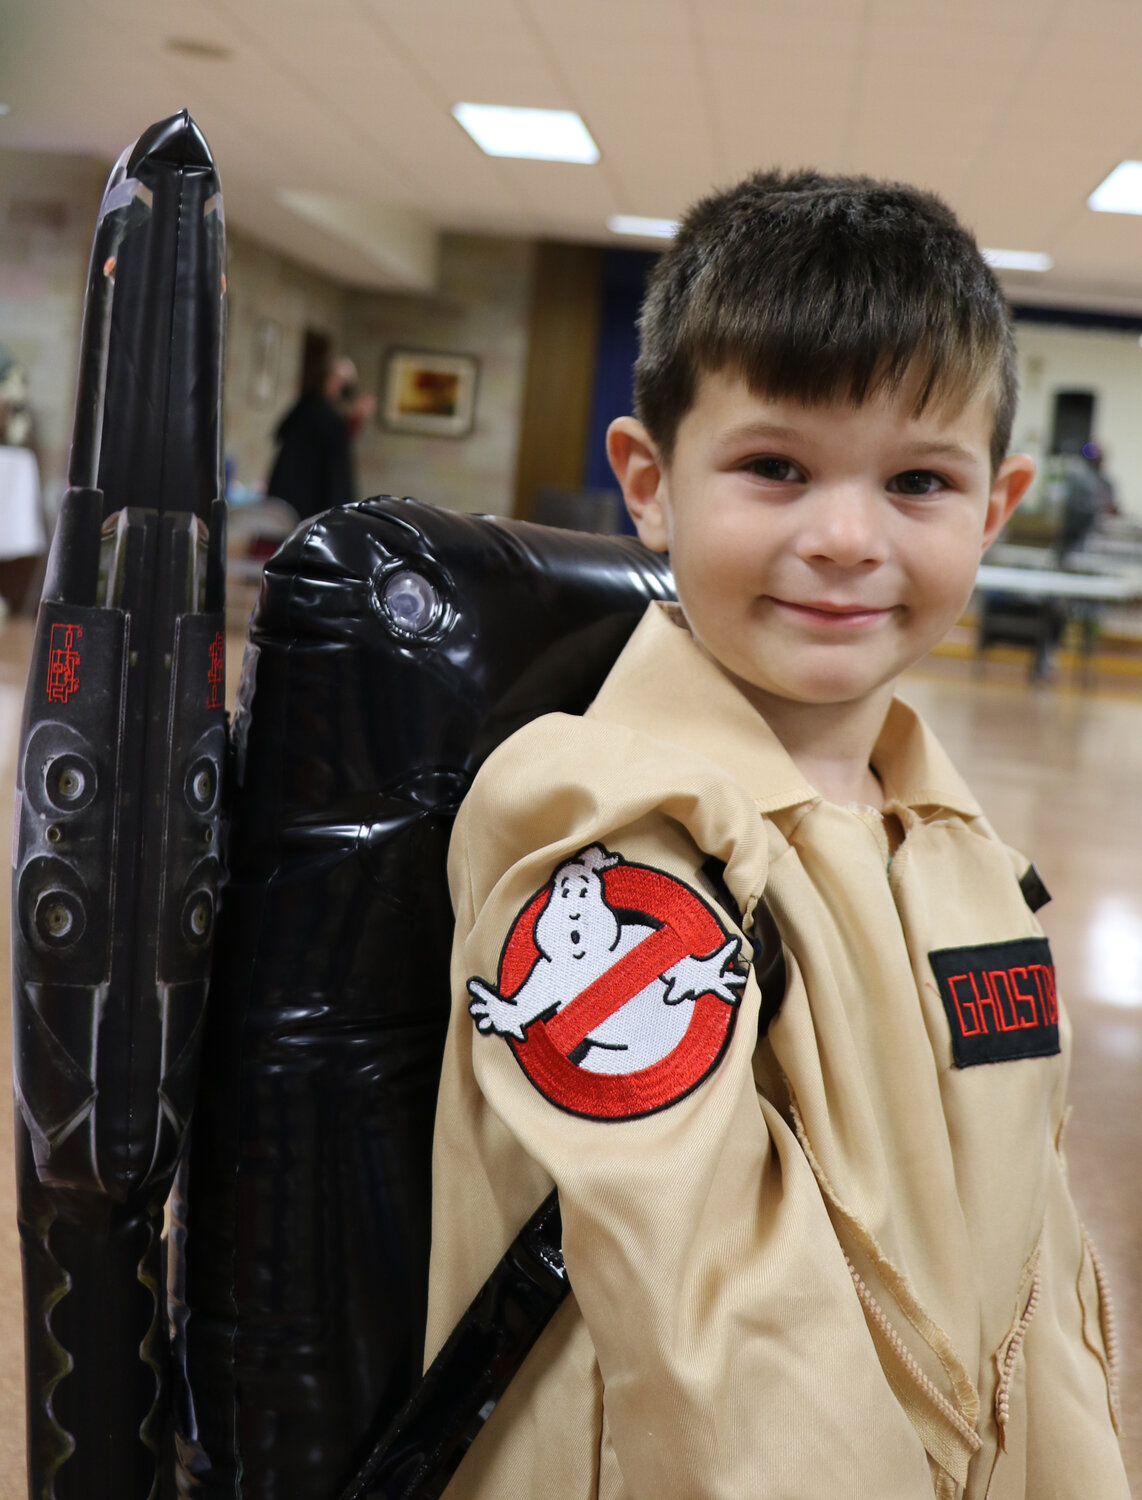 Reagan Buarotti dressed up as a Ghostbuster.